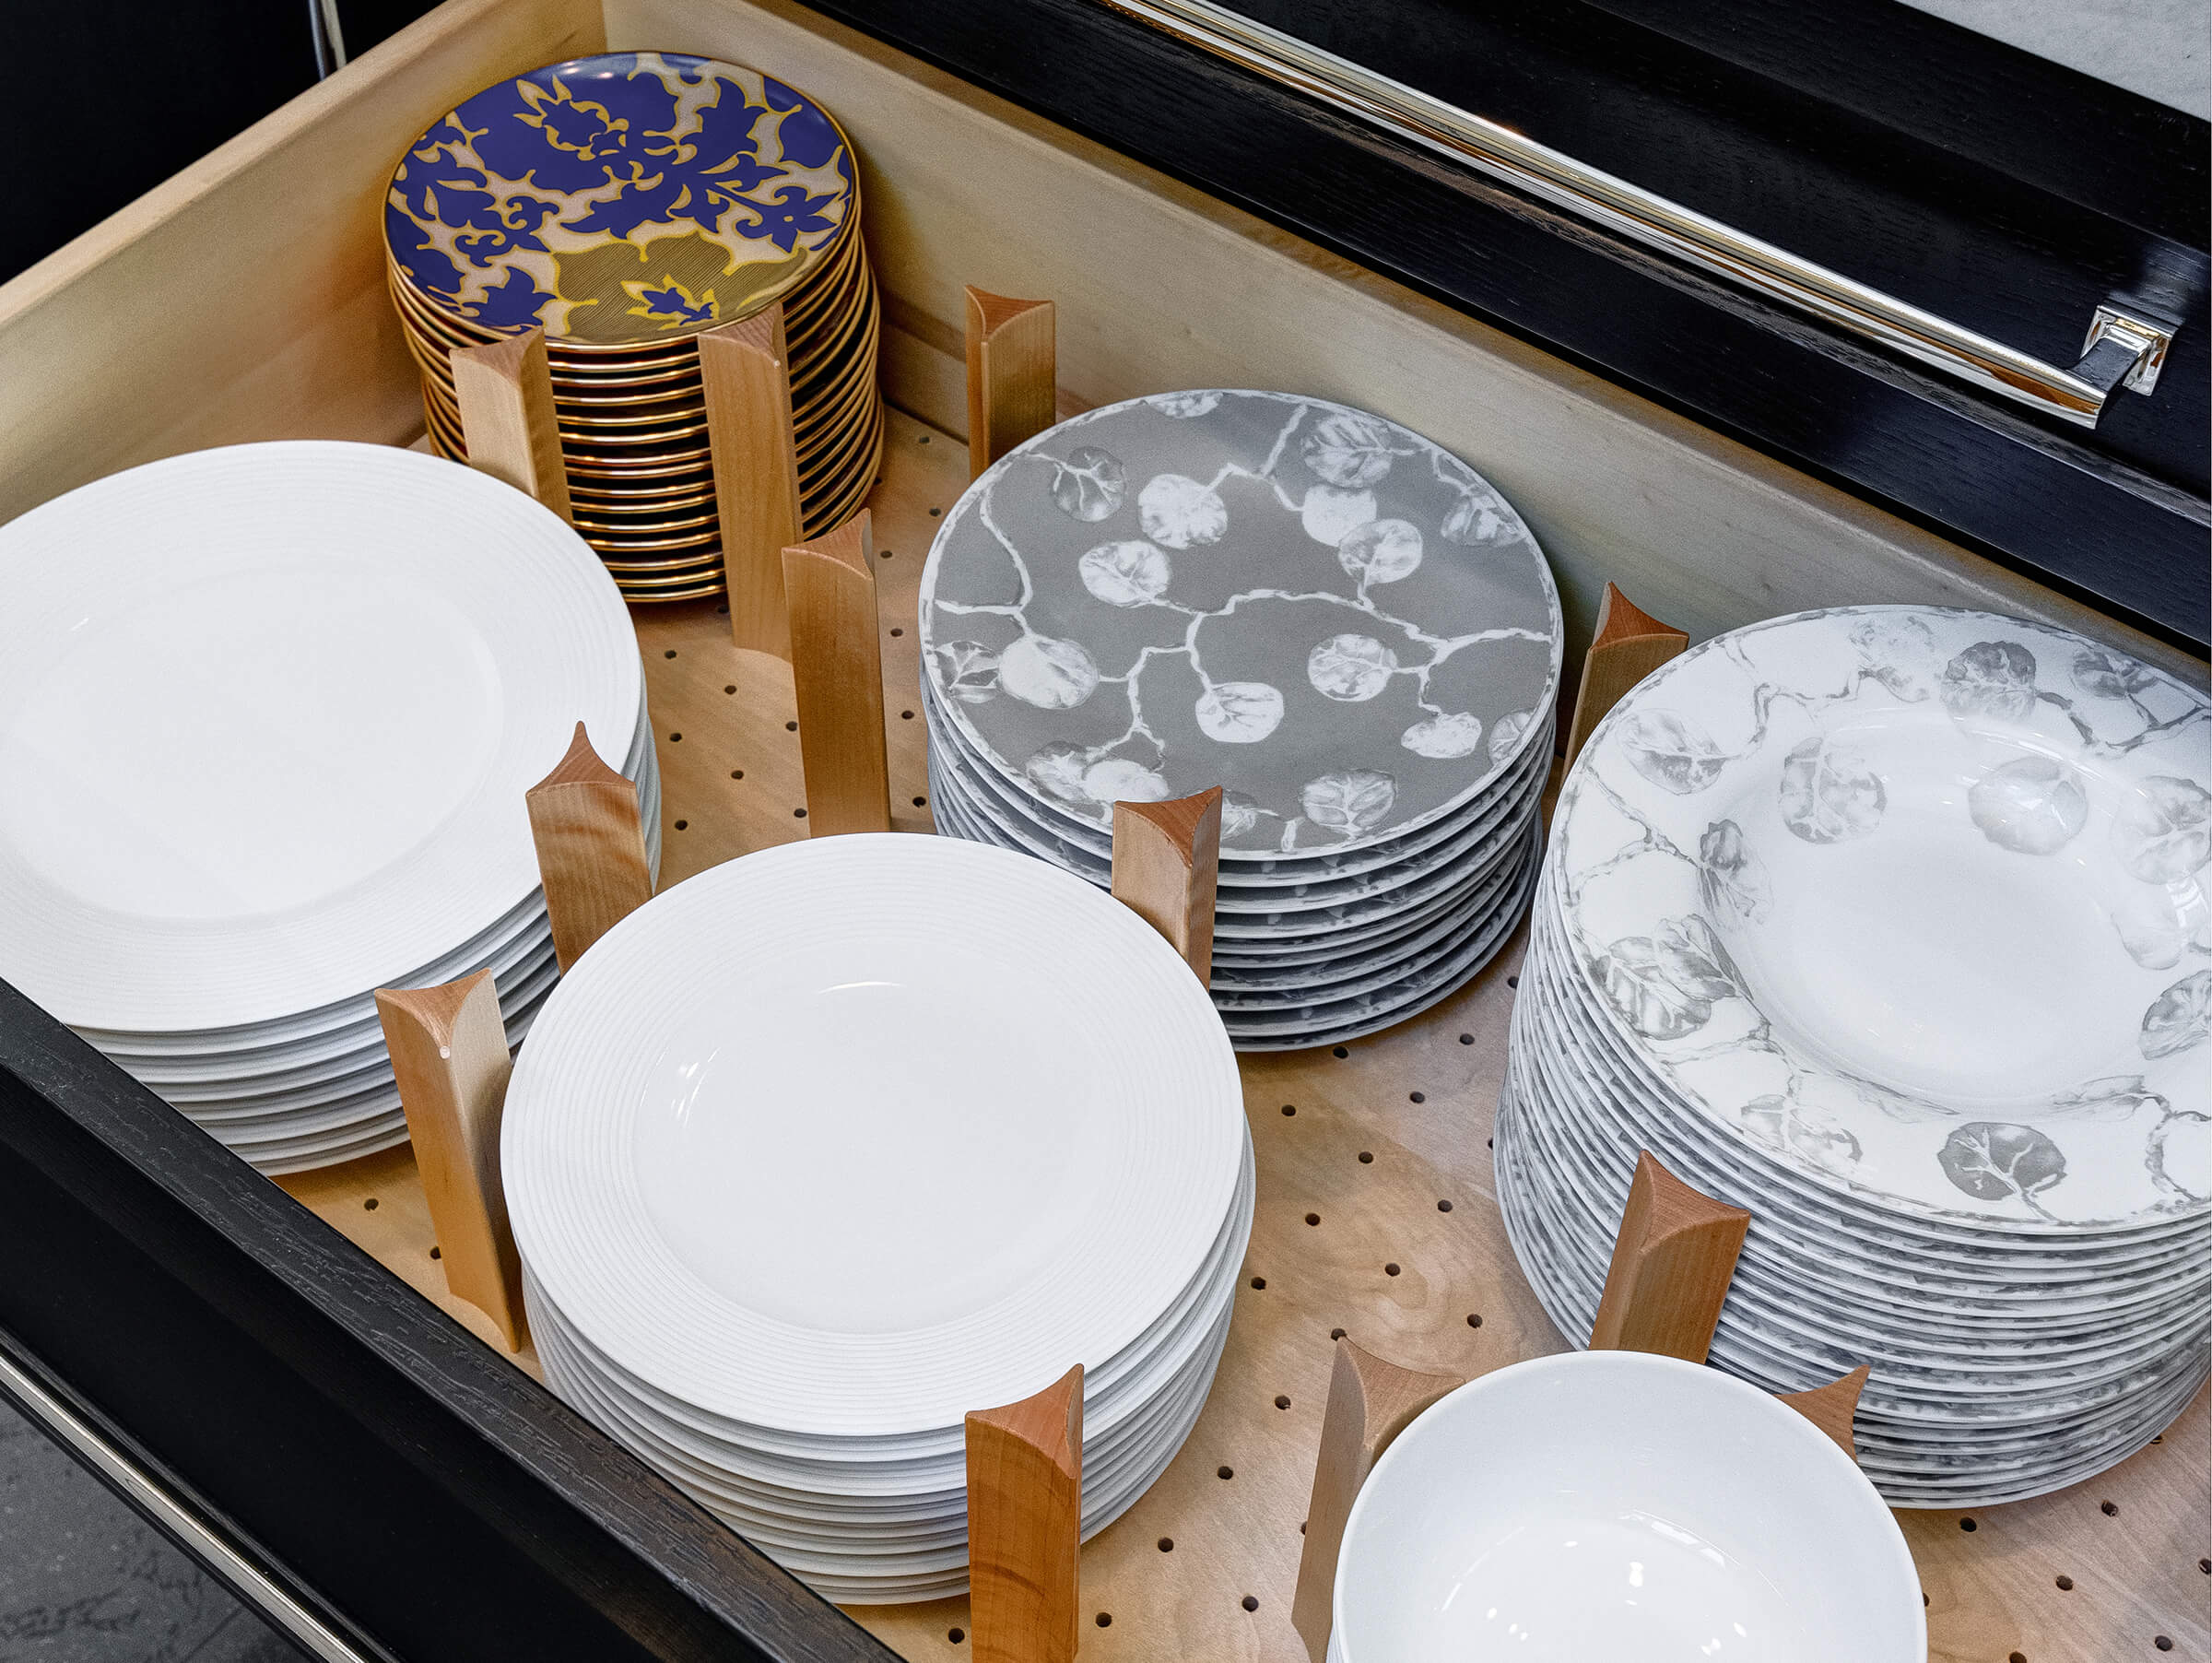 The Dish Storage Drawer offers a convenient location below the countertop for stacks of plates and bowls. This is a great solution if you’re planning to age-in-place or if you have children that enjoy helping out with the dishes.